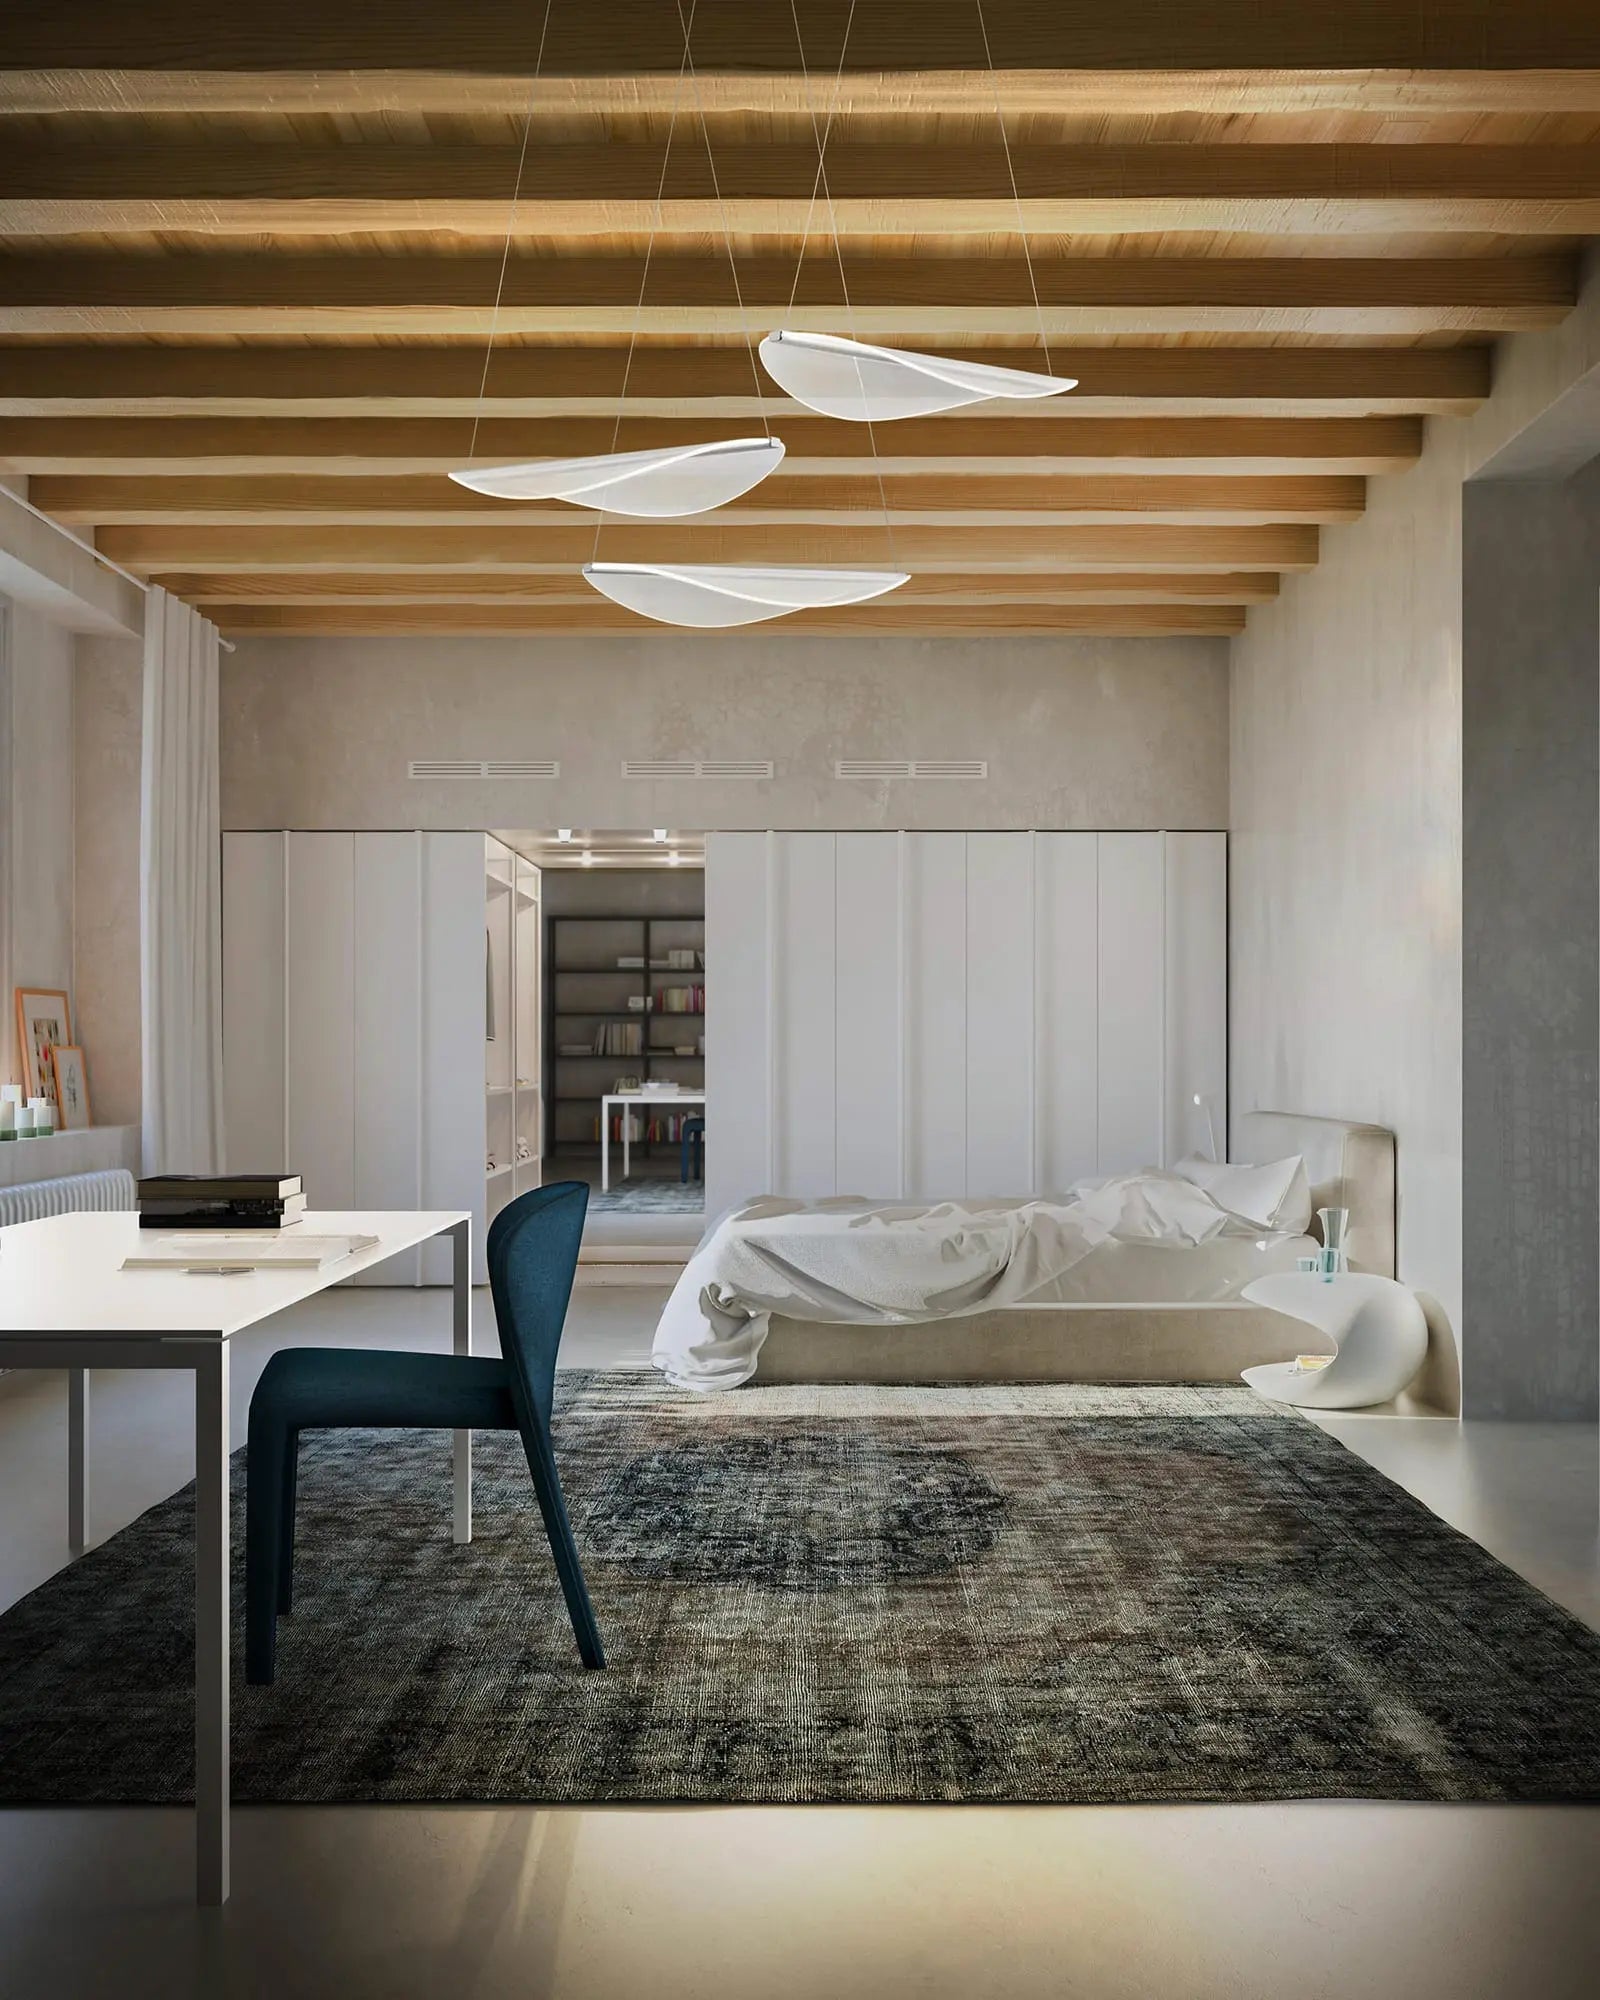 Diphy pendant light in a bedroom